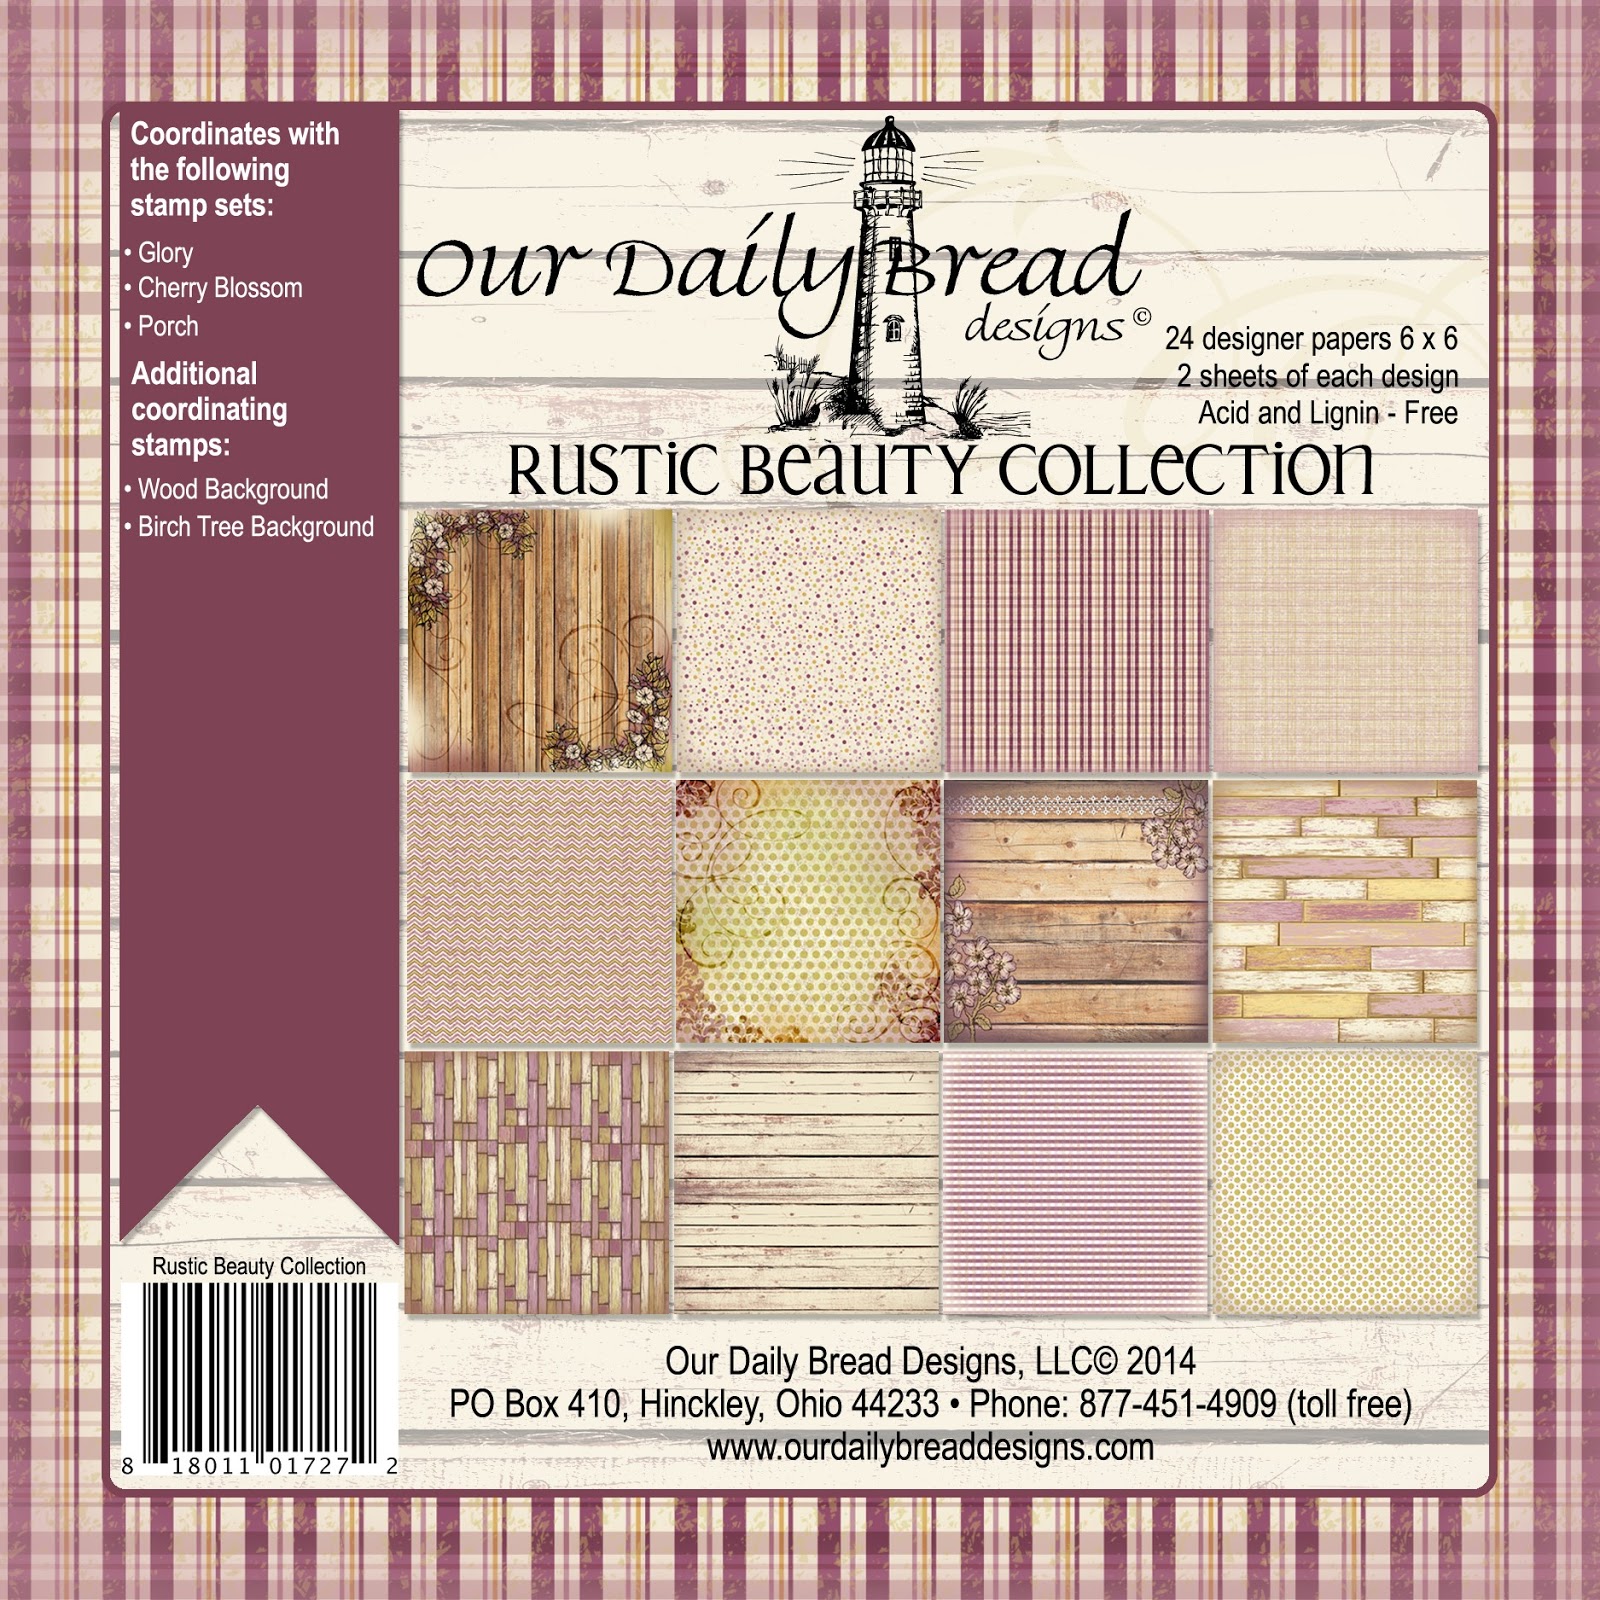 https://www.ourdailybreaddesigns.com/index.php/rustic-beauty-6x6-paper-pad.html